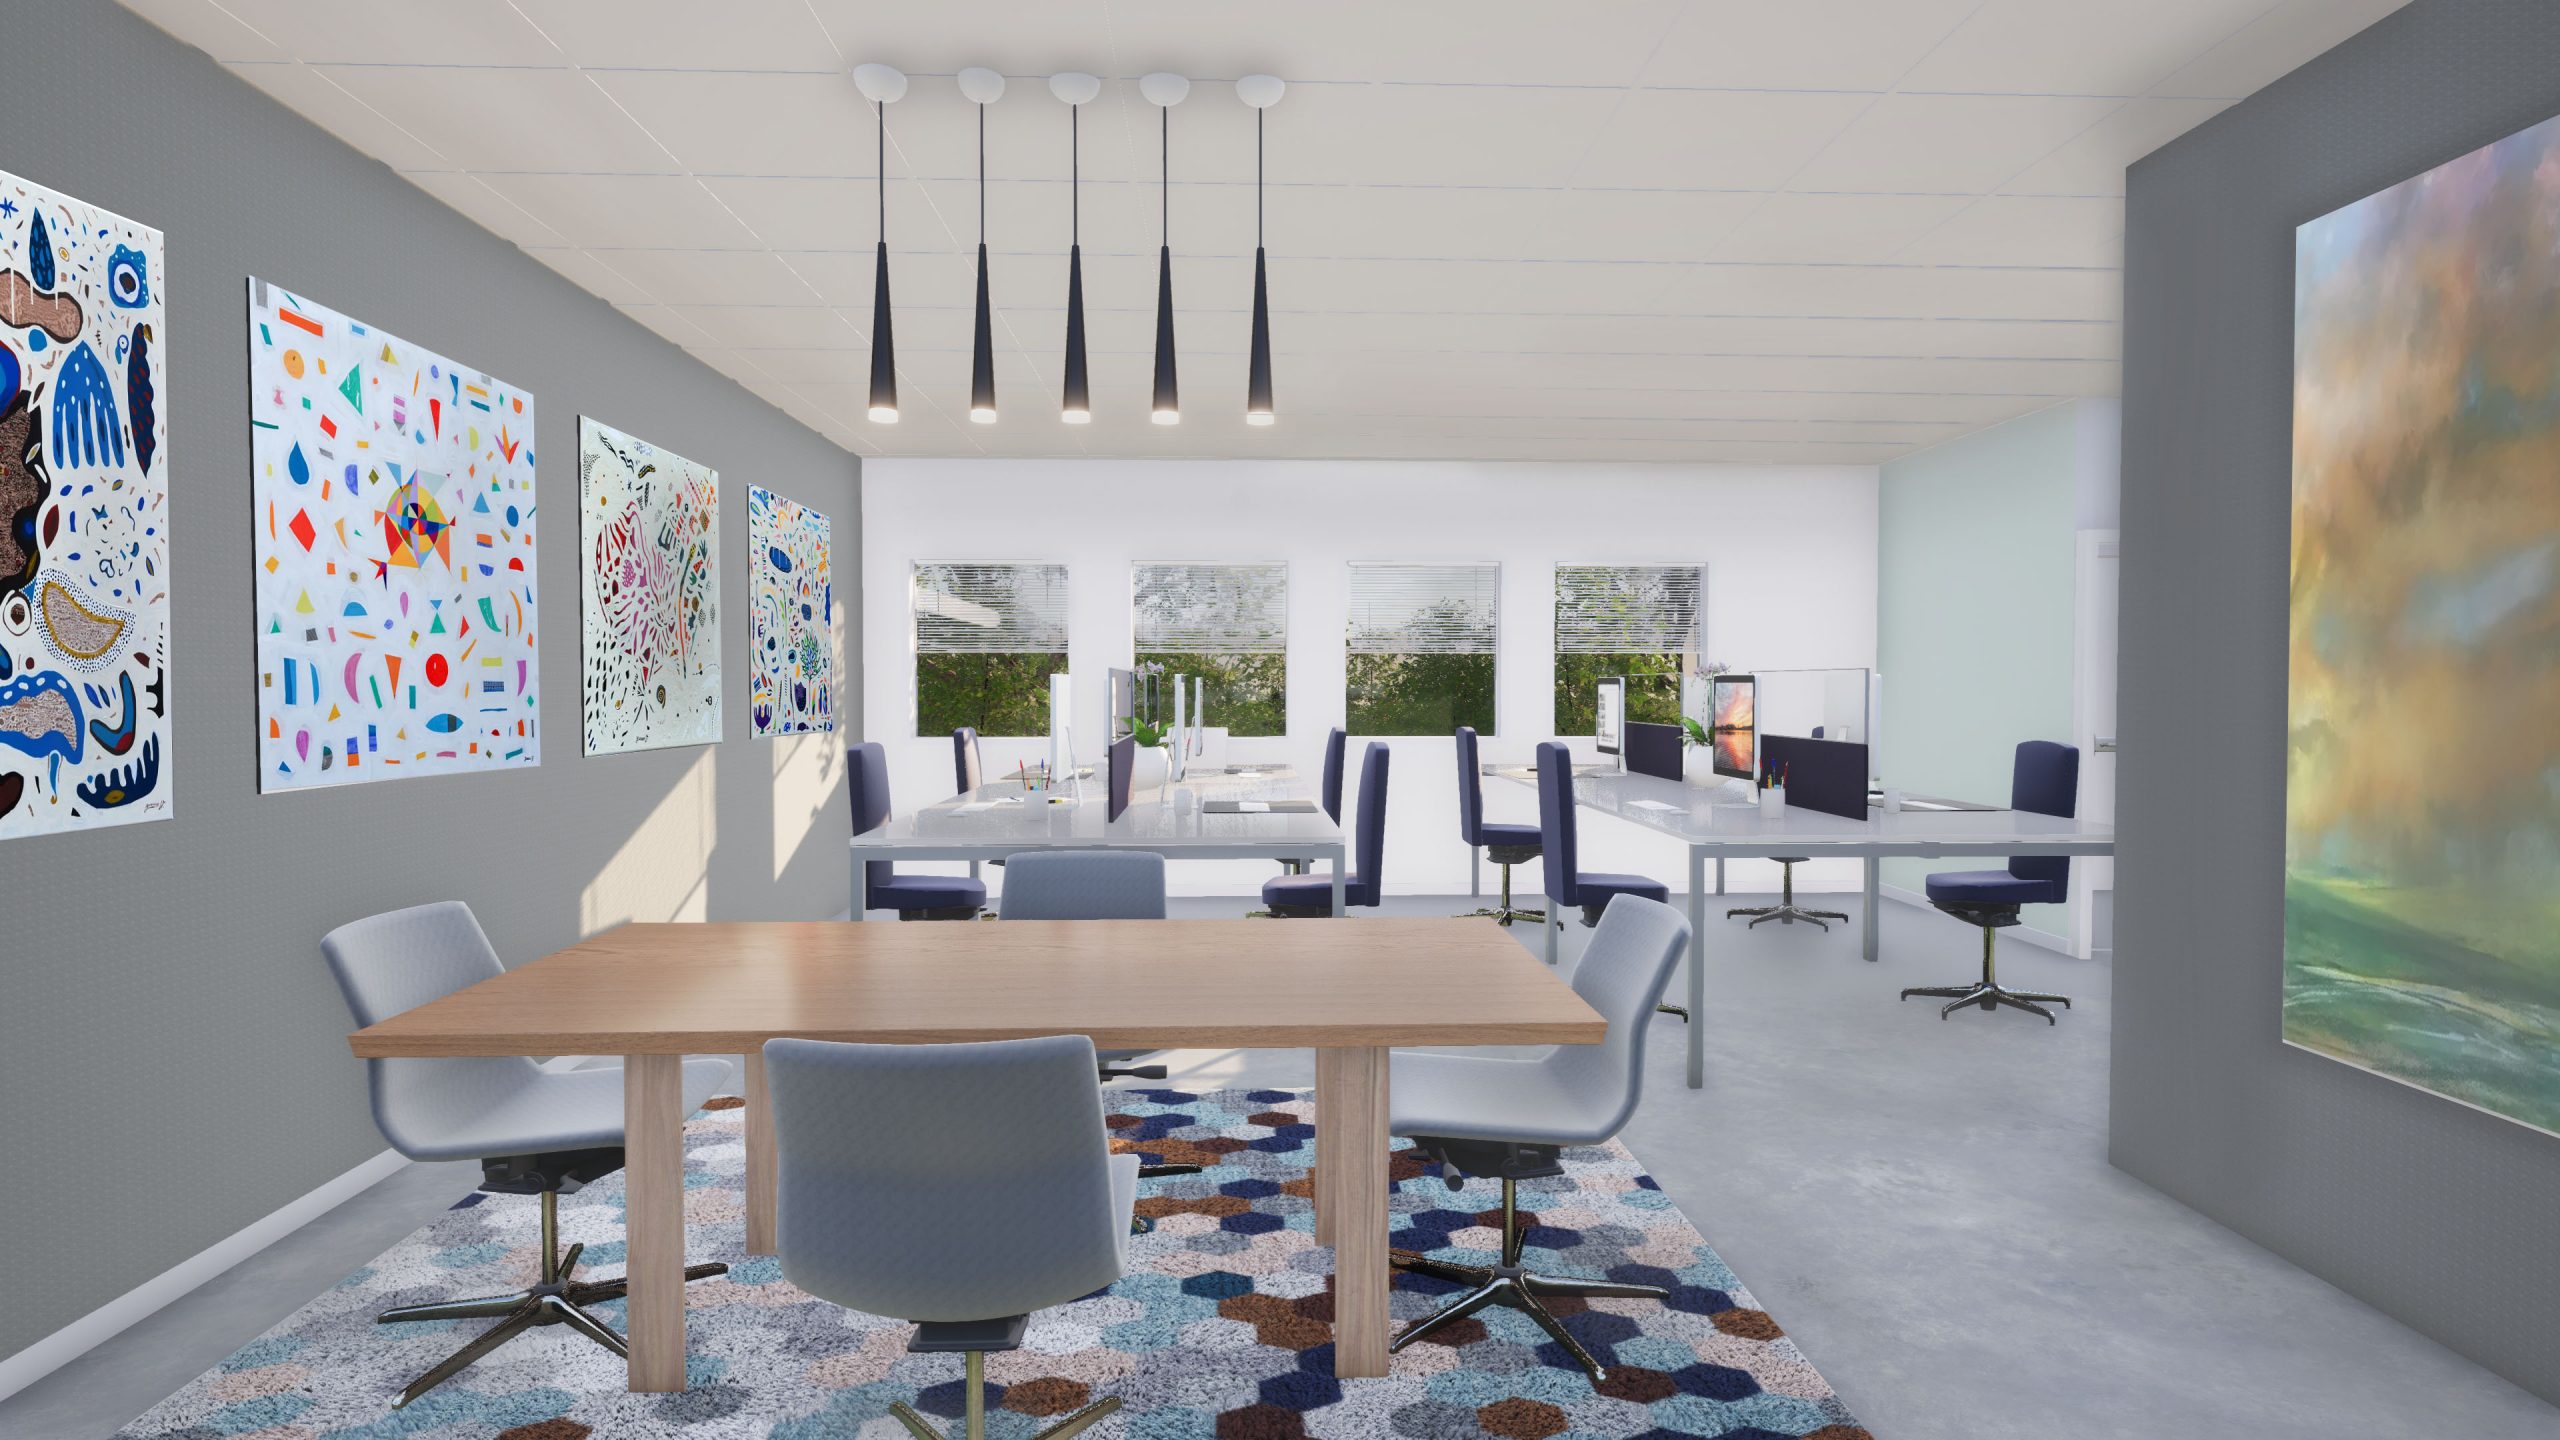 The power of visualising an office space before construction